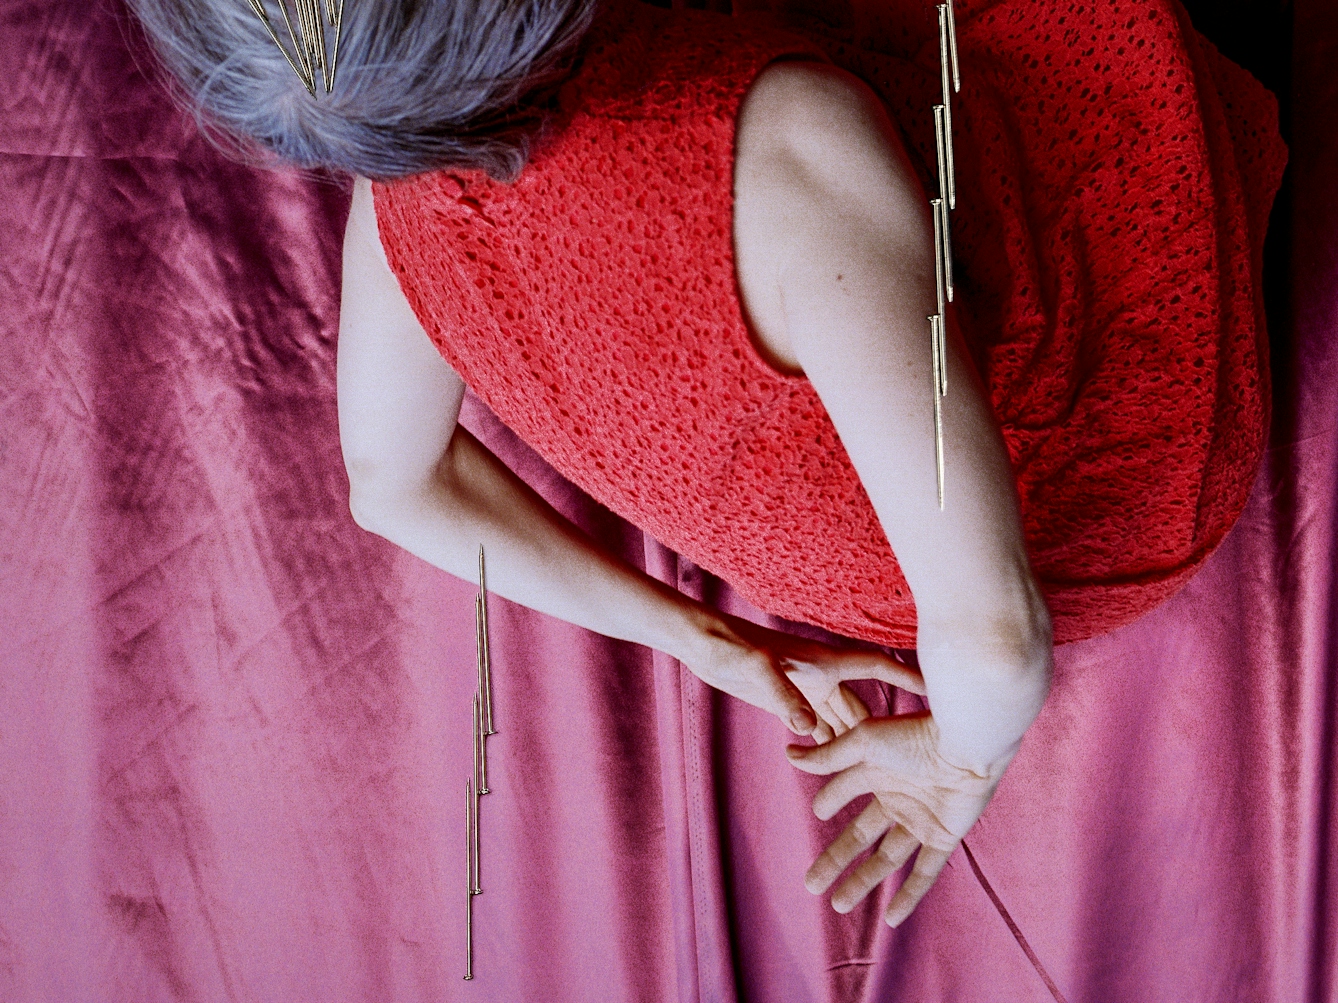 Detail from a larger artwork created with a colour photographic print of a female figure in a bright red dress, set against a purple and blue draped silk background. She is curled up in the frame with her hands loosely clasped behind her back. Her body is targeted by groups of dress pins, laid on top of the photographic print. The pins are arranged as if they are a flight of arrows directed at her body. Two group attack her arms from underneath and above.